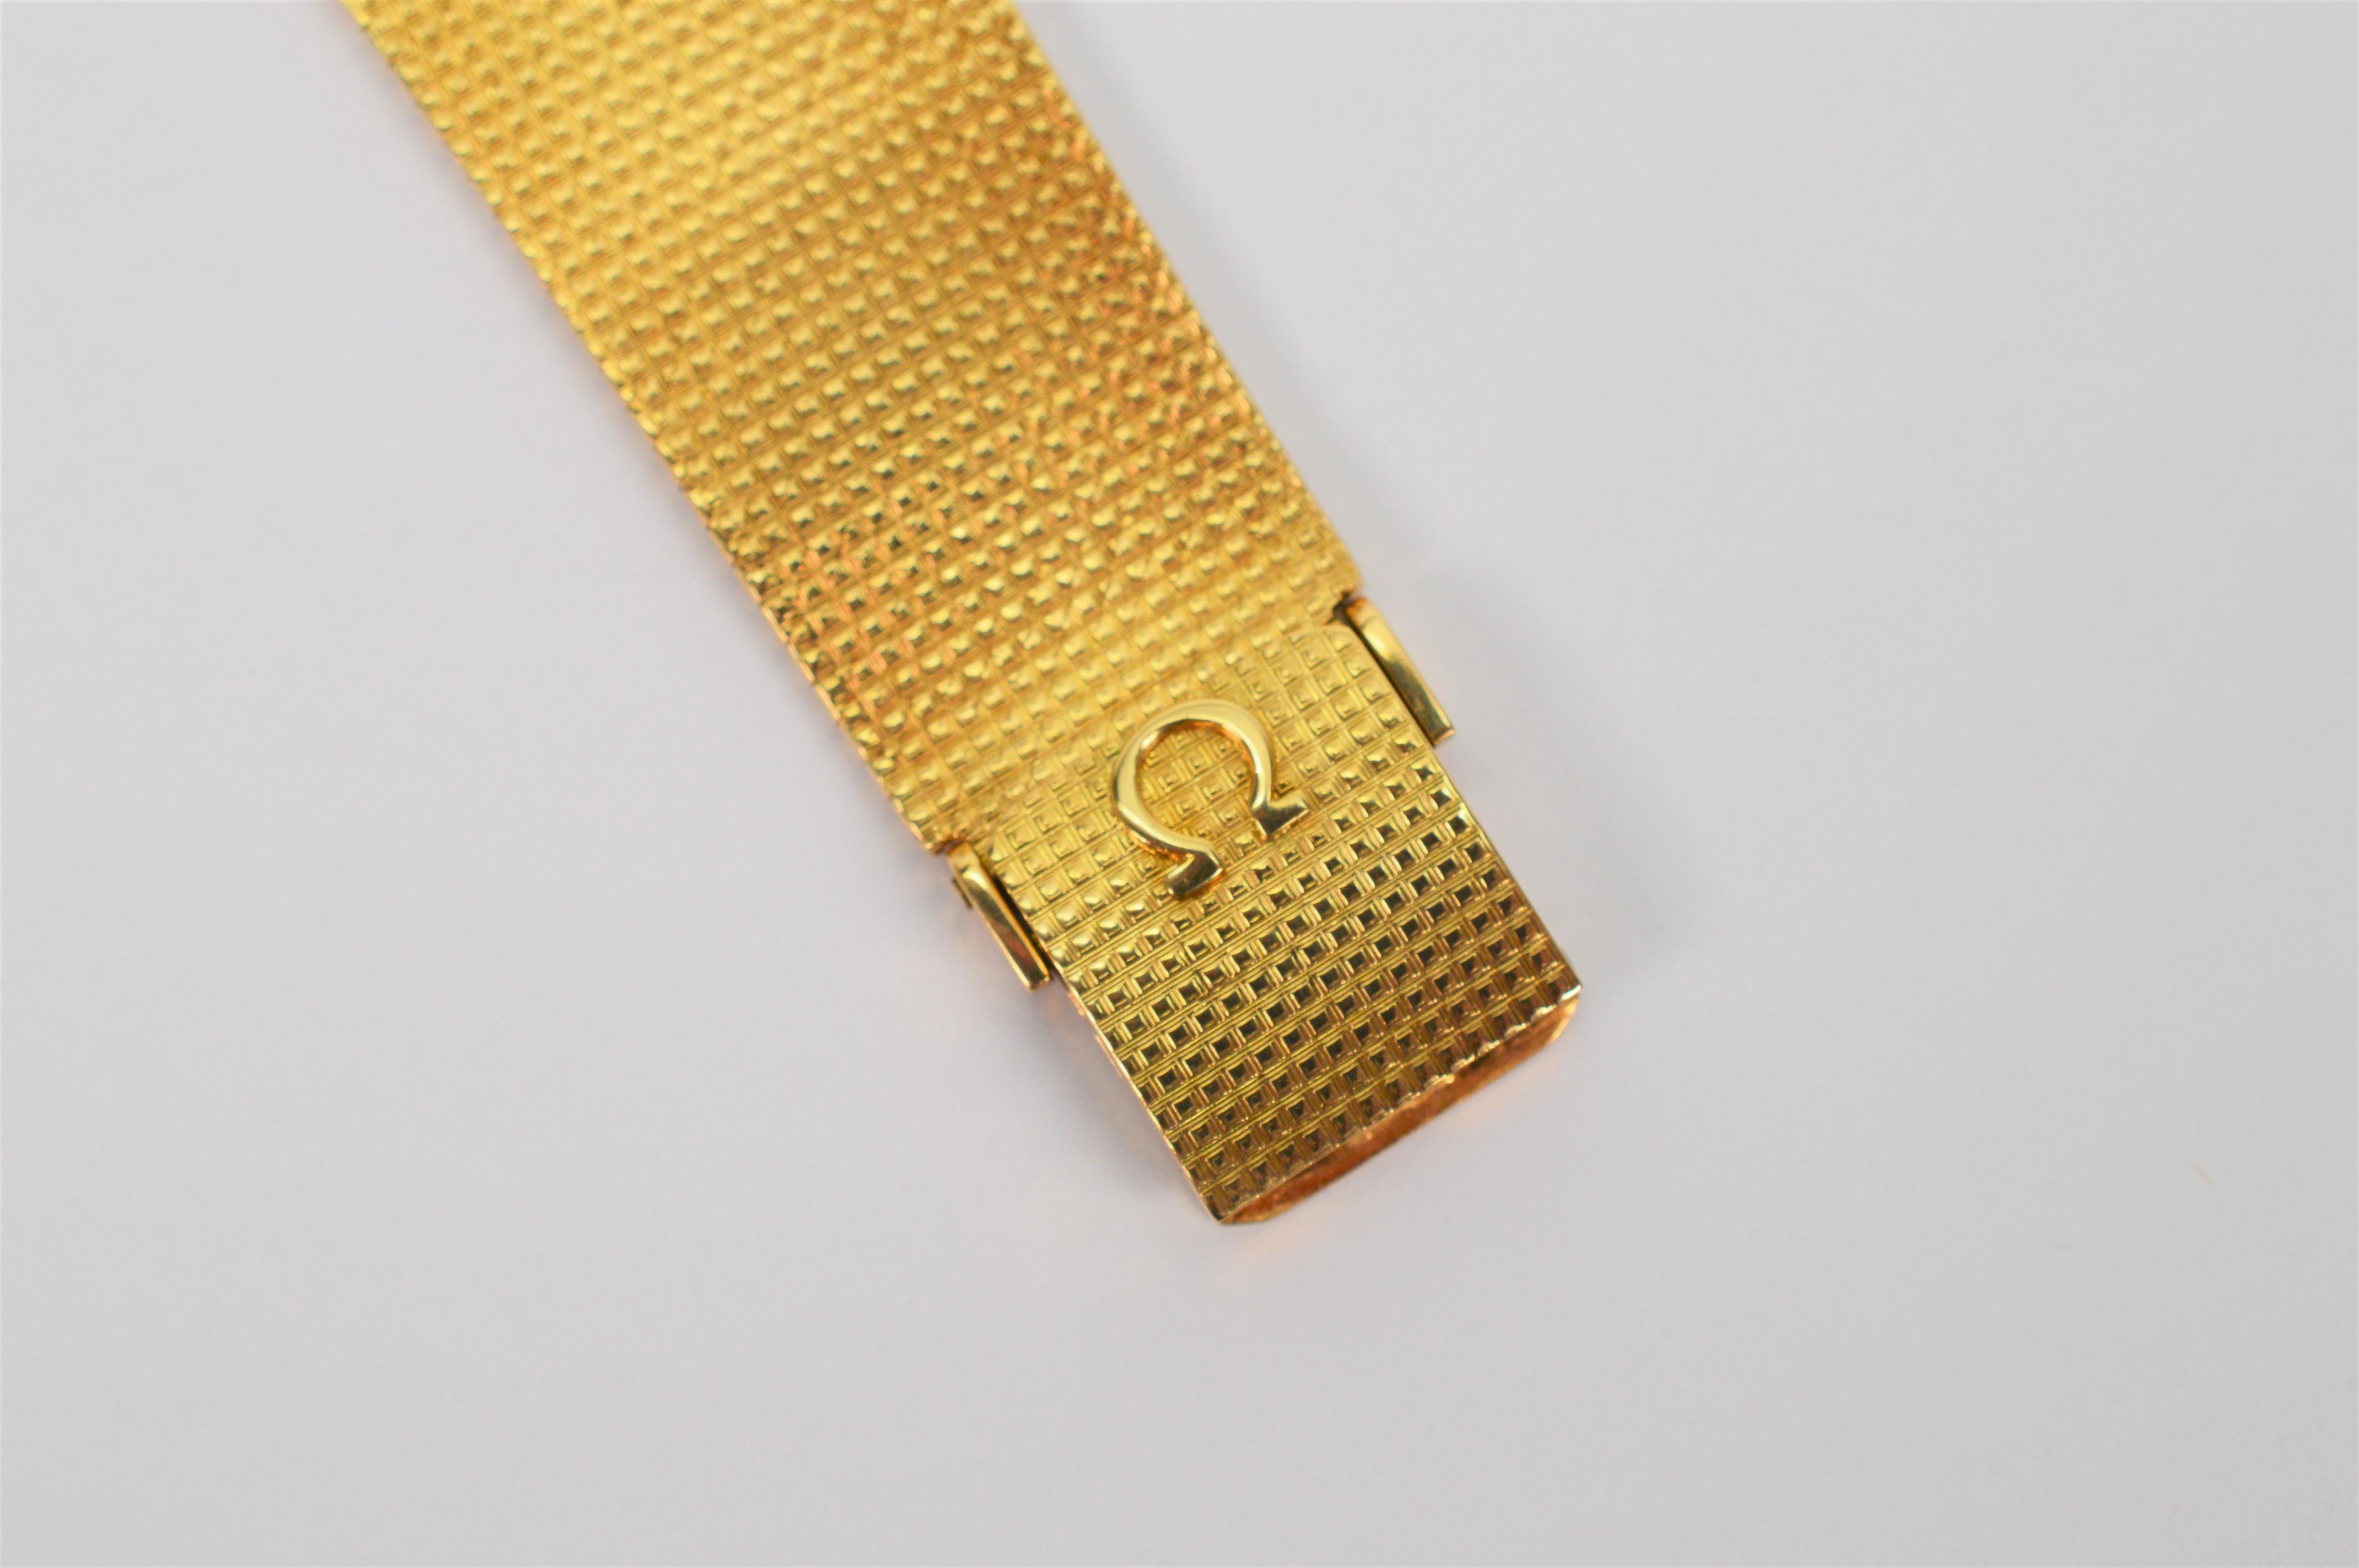 Omega 18 Karat Yellow Gold Men's Dress Wrist Watch with Box In Excellent Condition For Sale In Mount Kisco, NY